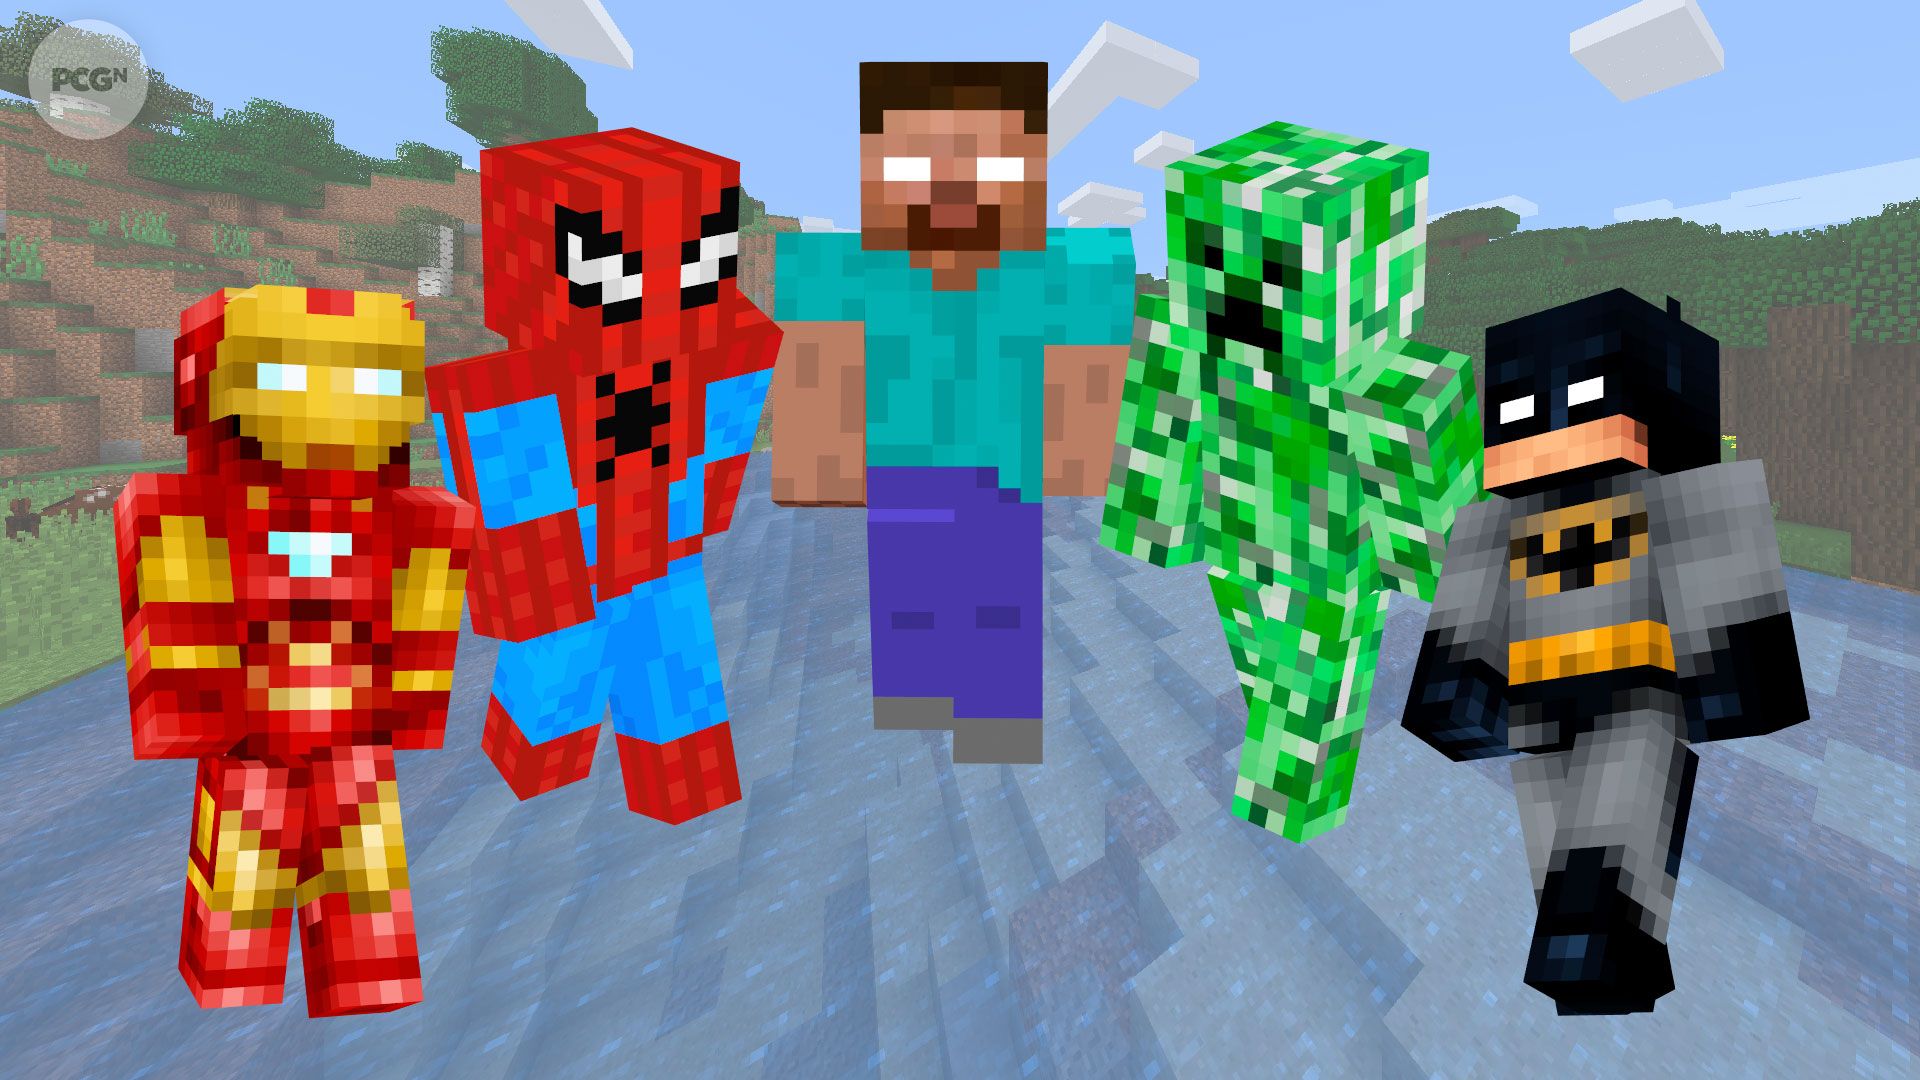 cool girl skins for minecraft